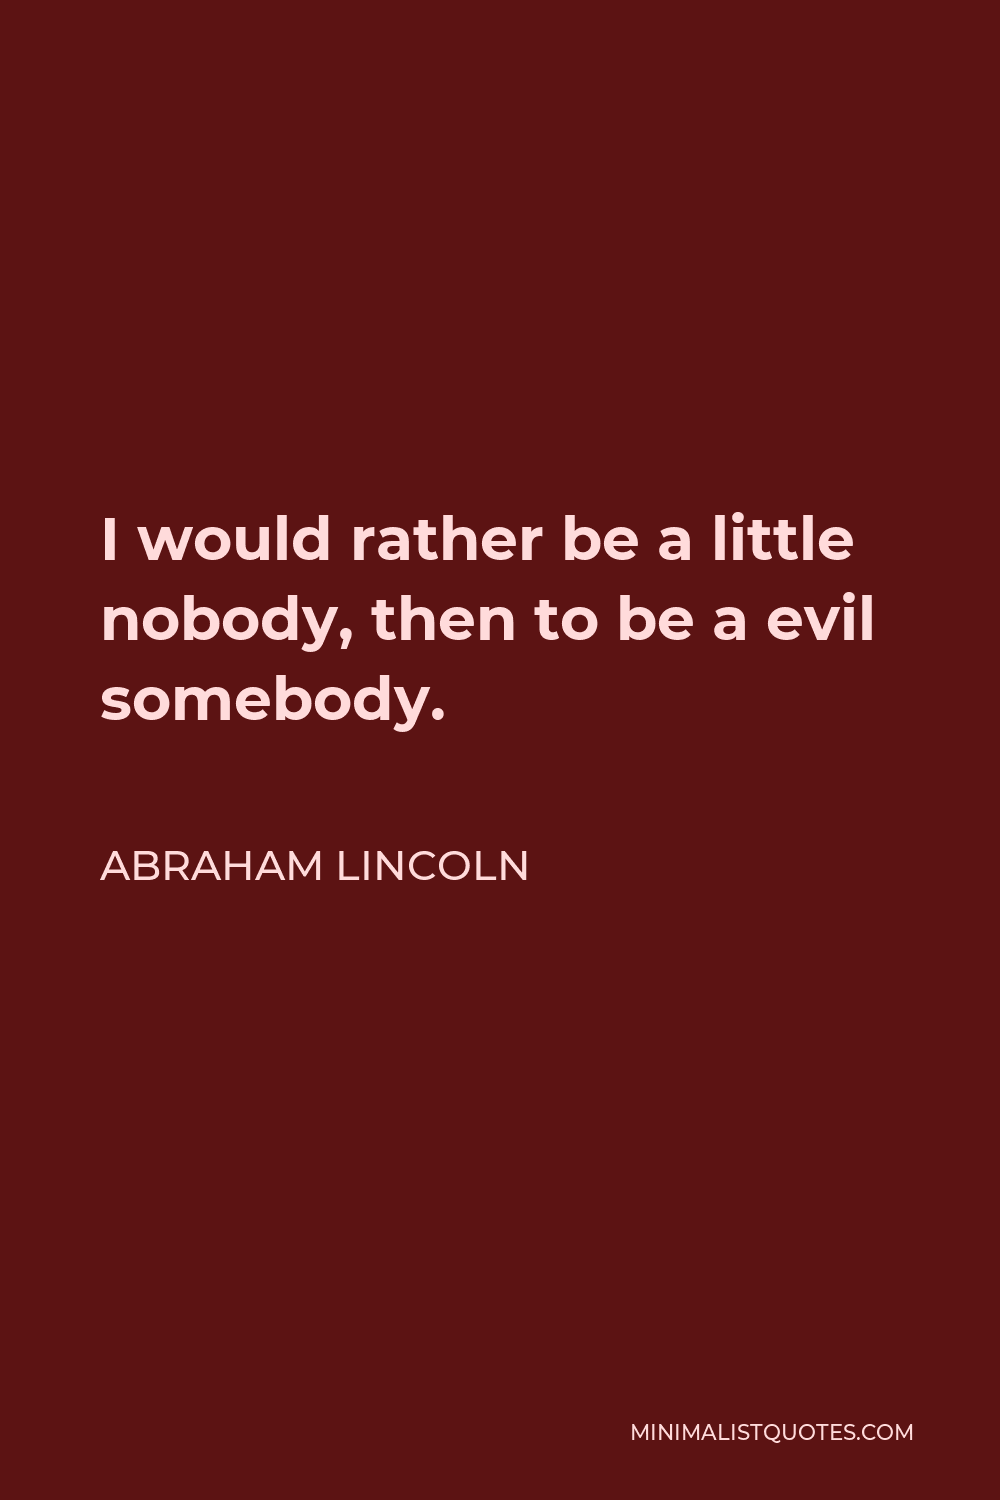 Abraham Lincoln Quote - I would rather be a little nobody, then to be a evil somebody.